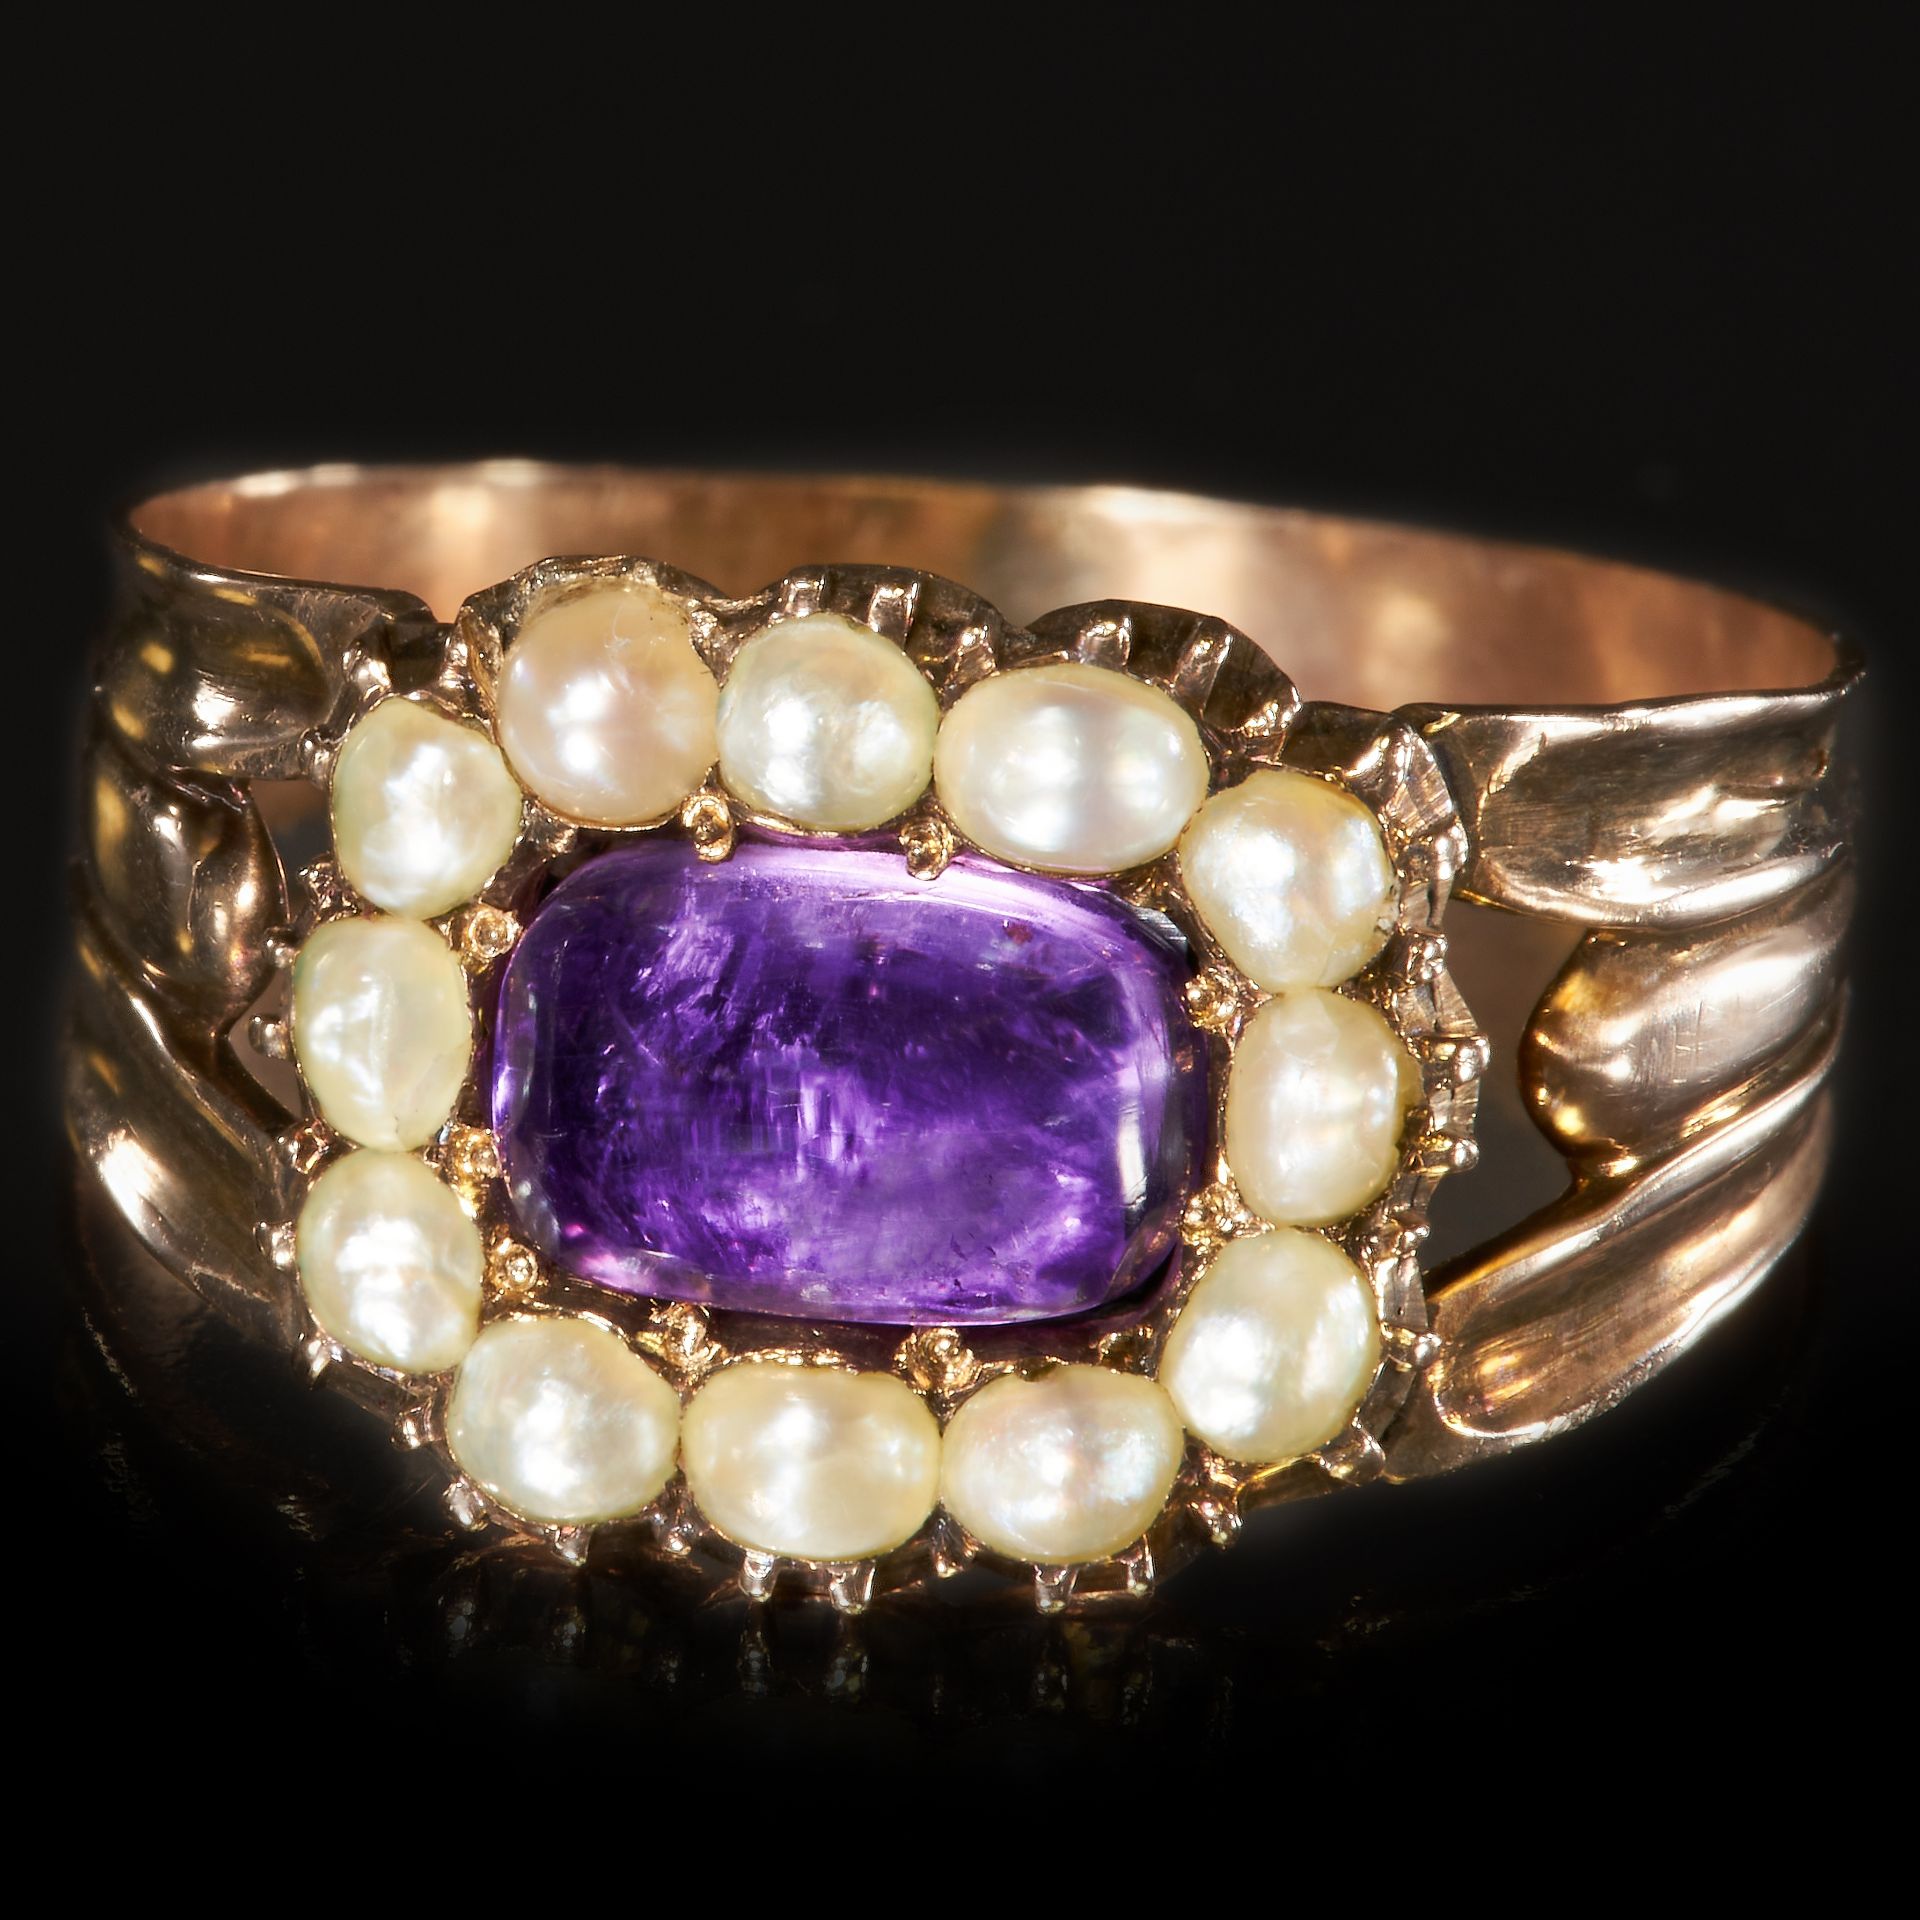 ANTIQUE GEORGIAN AMETHYST AND PEARL CLUSTER RING